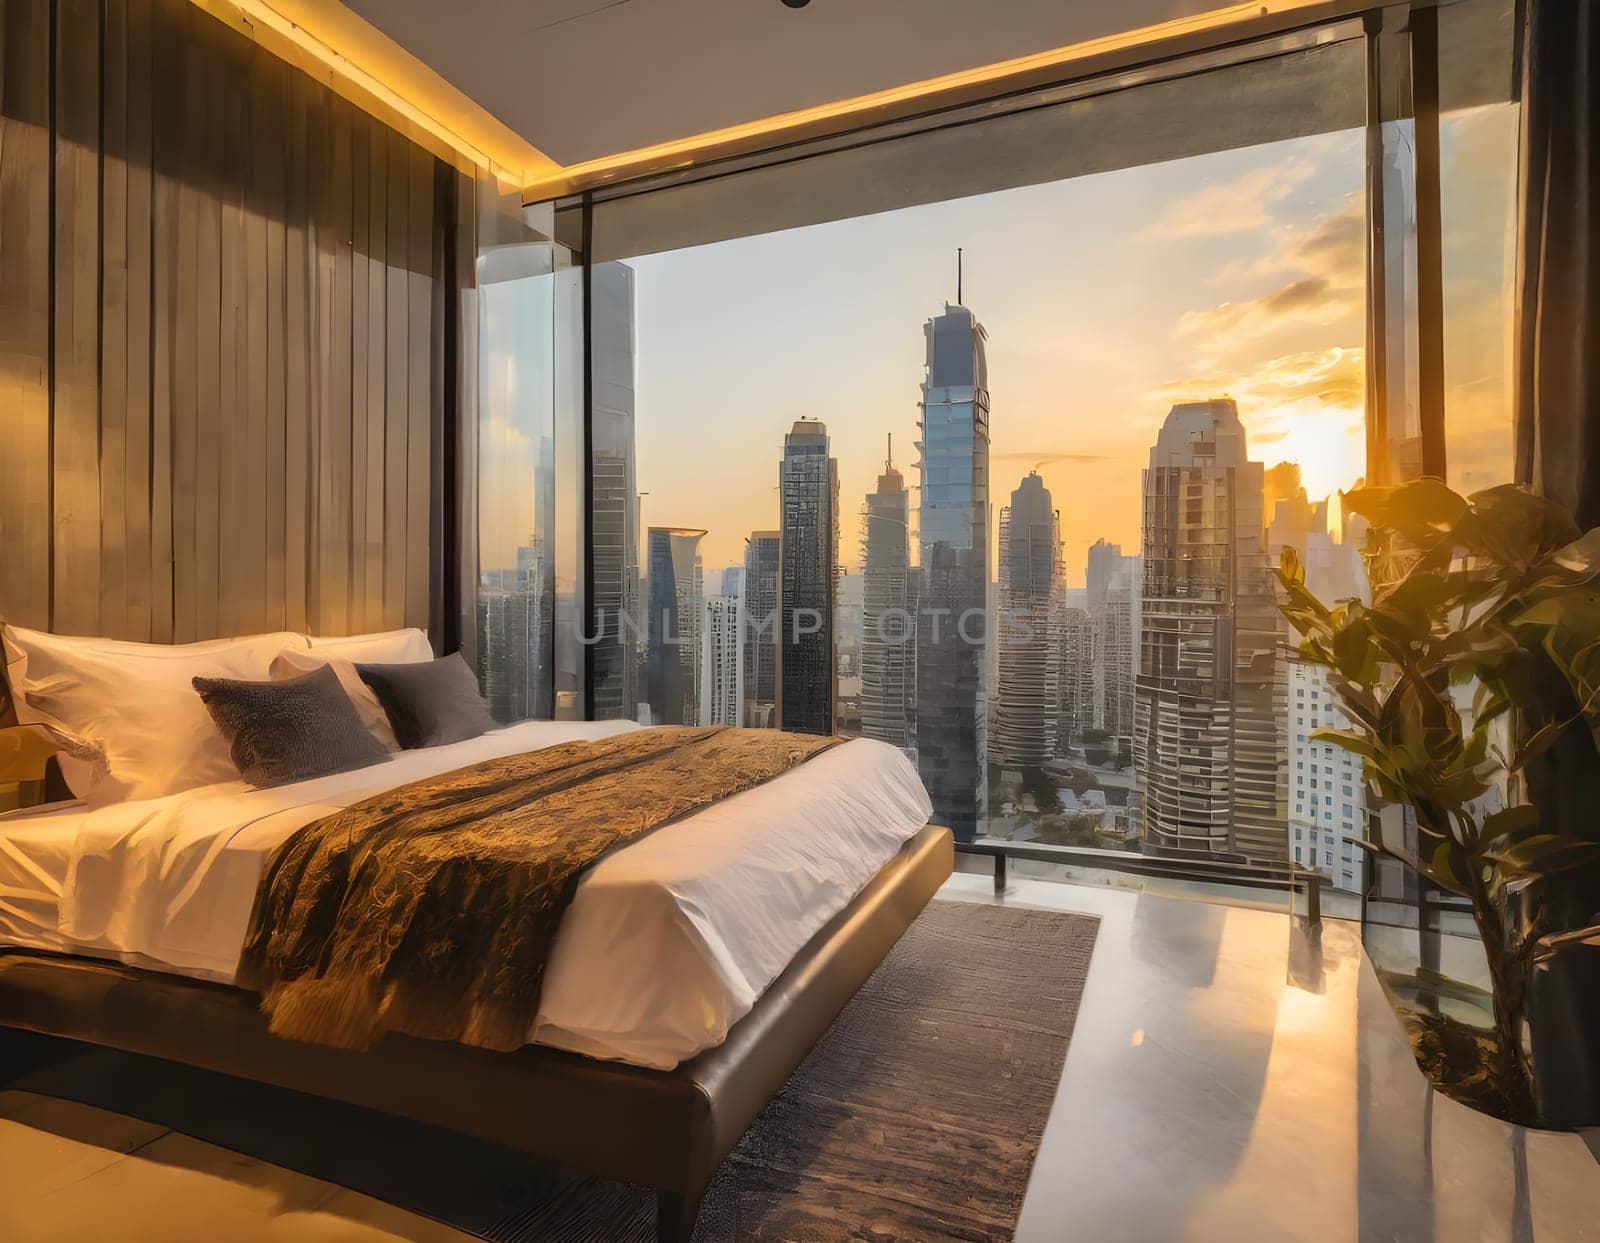 Modern and contemporary bedroom with views of the financial district of the city. Condo or Hotel accommodation